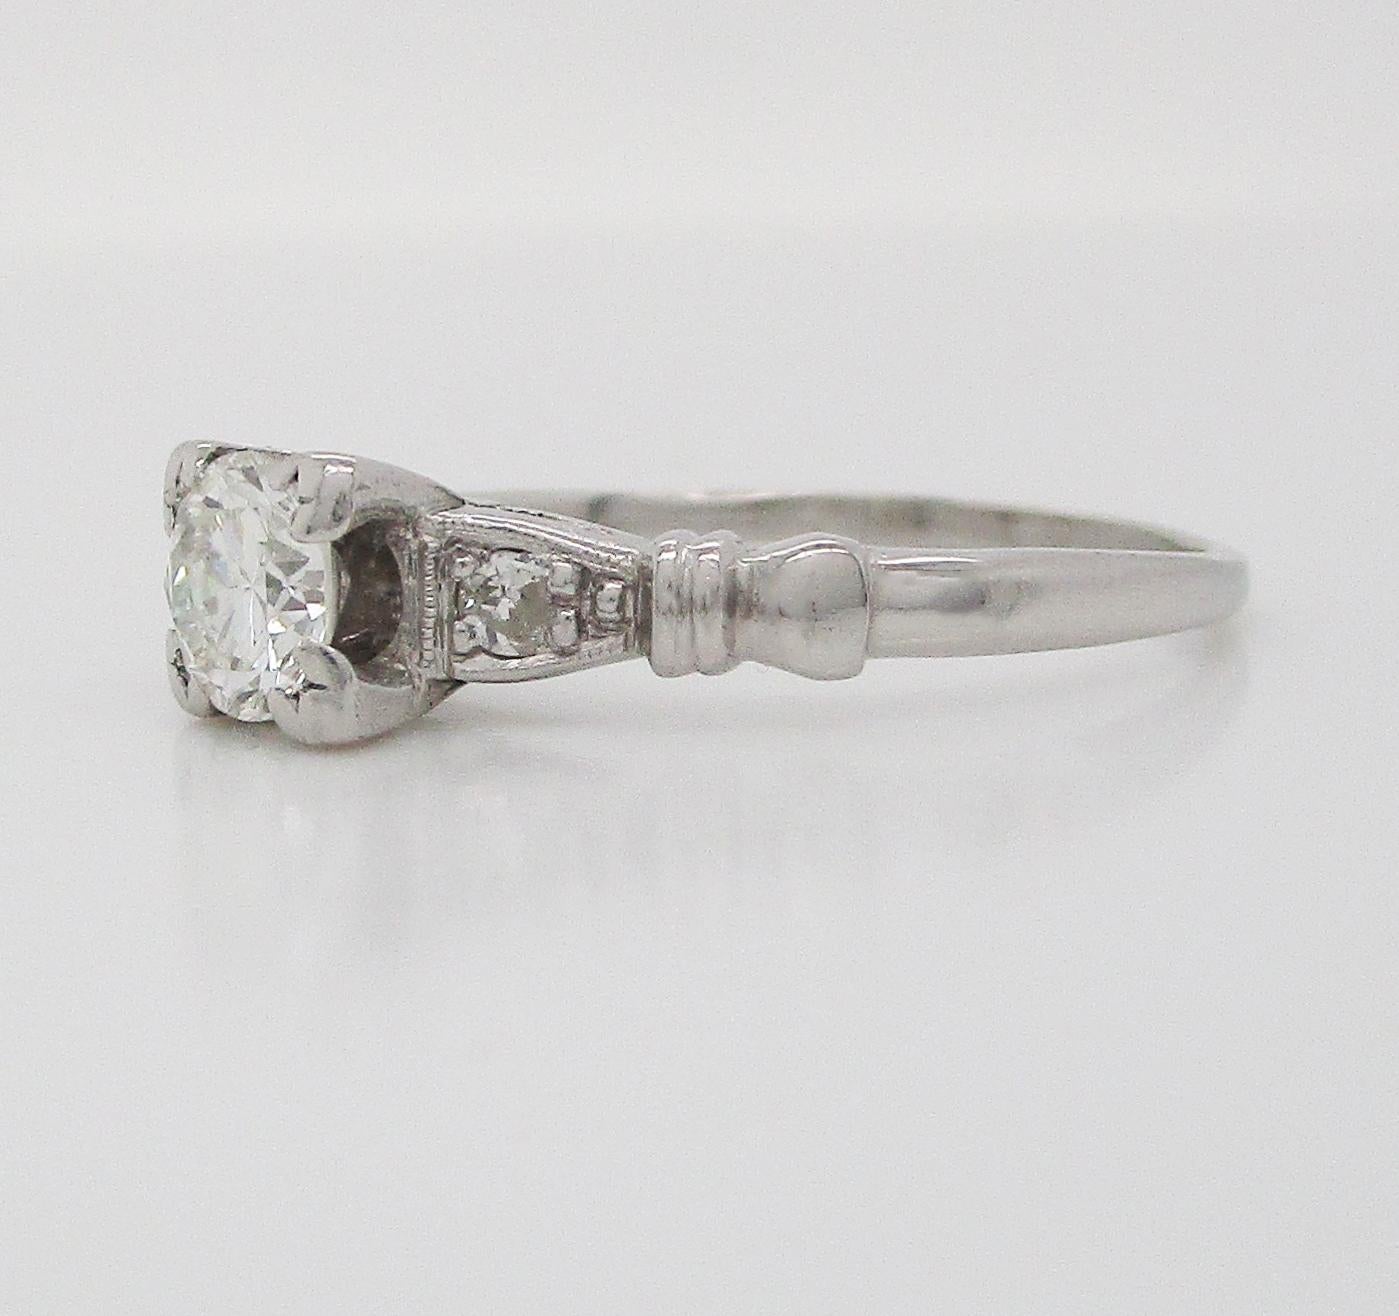 This is a stunning mid-century diamond engagement ring in platinum with lovely engraved shoulders. The ring features a diamond on each shoulder, framed by engraved details and accented by a fluted element on each shoulder. This ring is full of